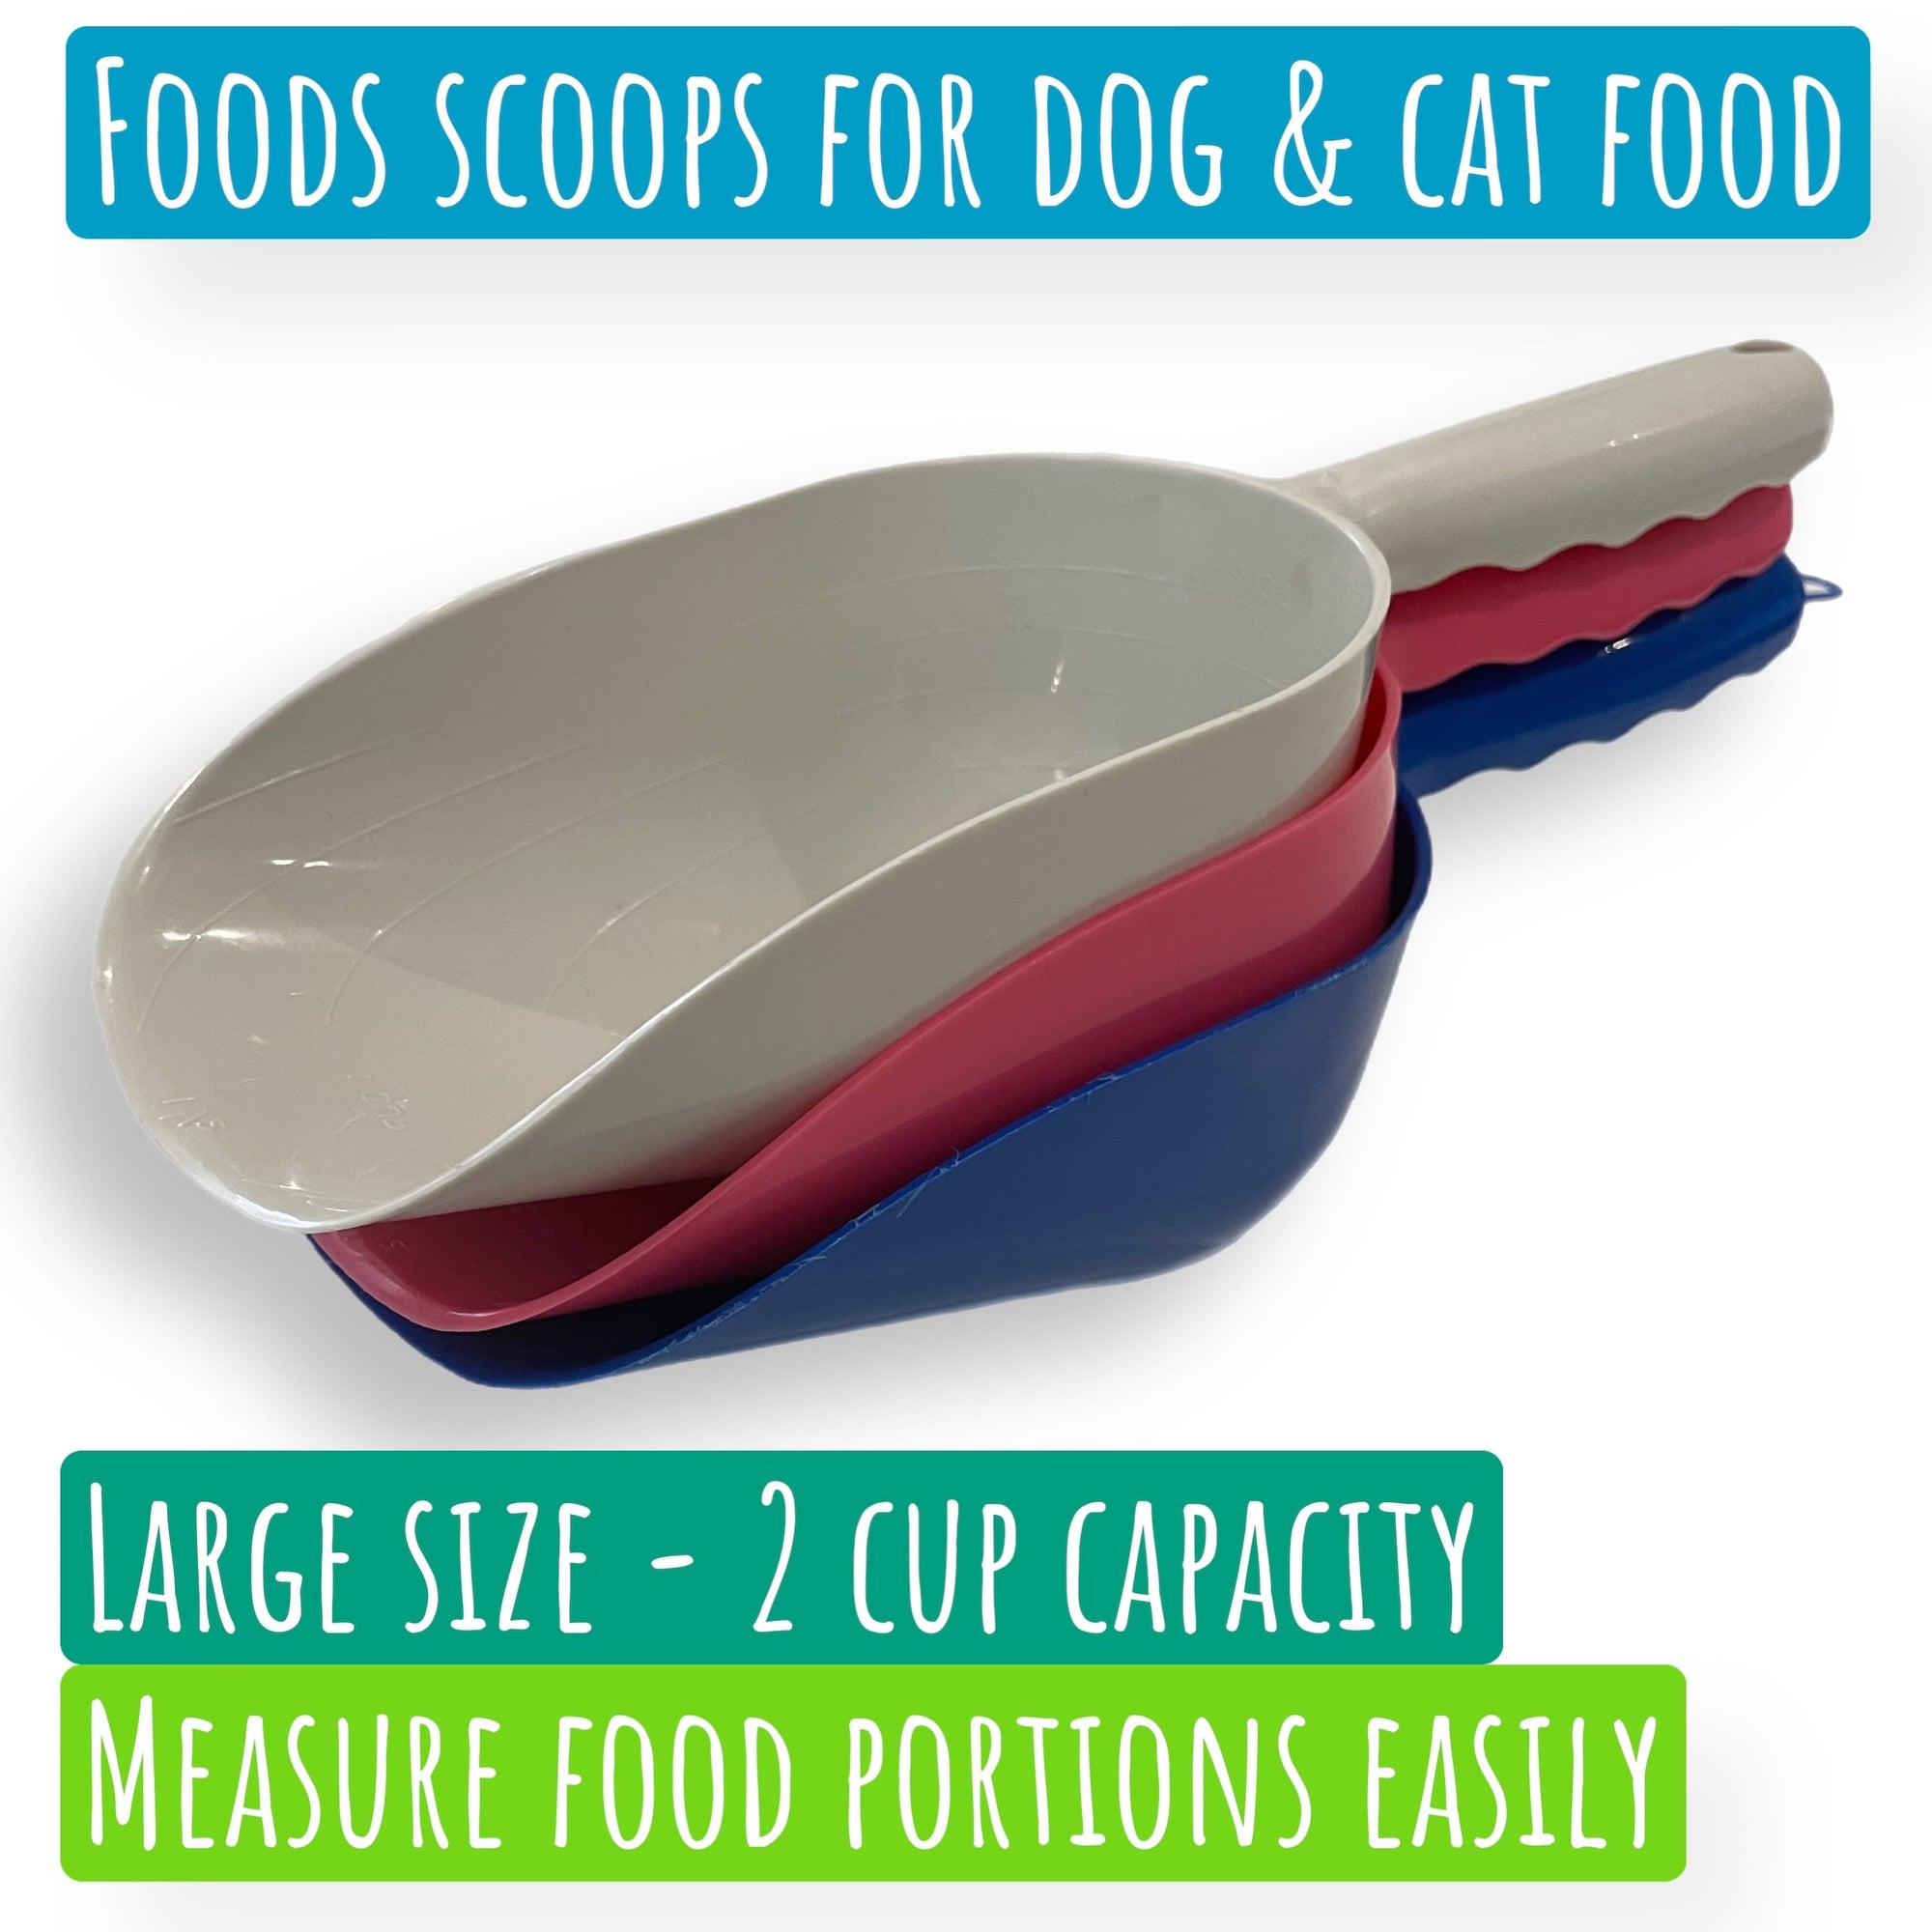 dog and cat plastic food scoops - 2 cup capacity